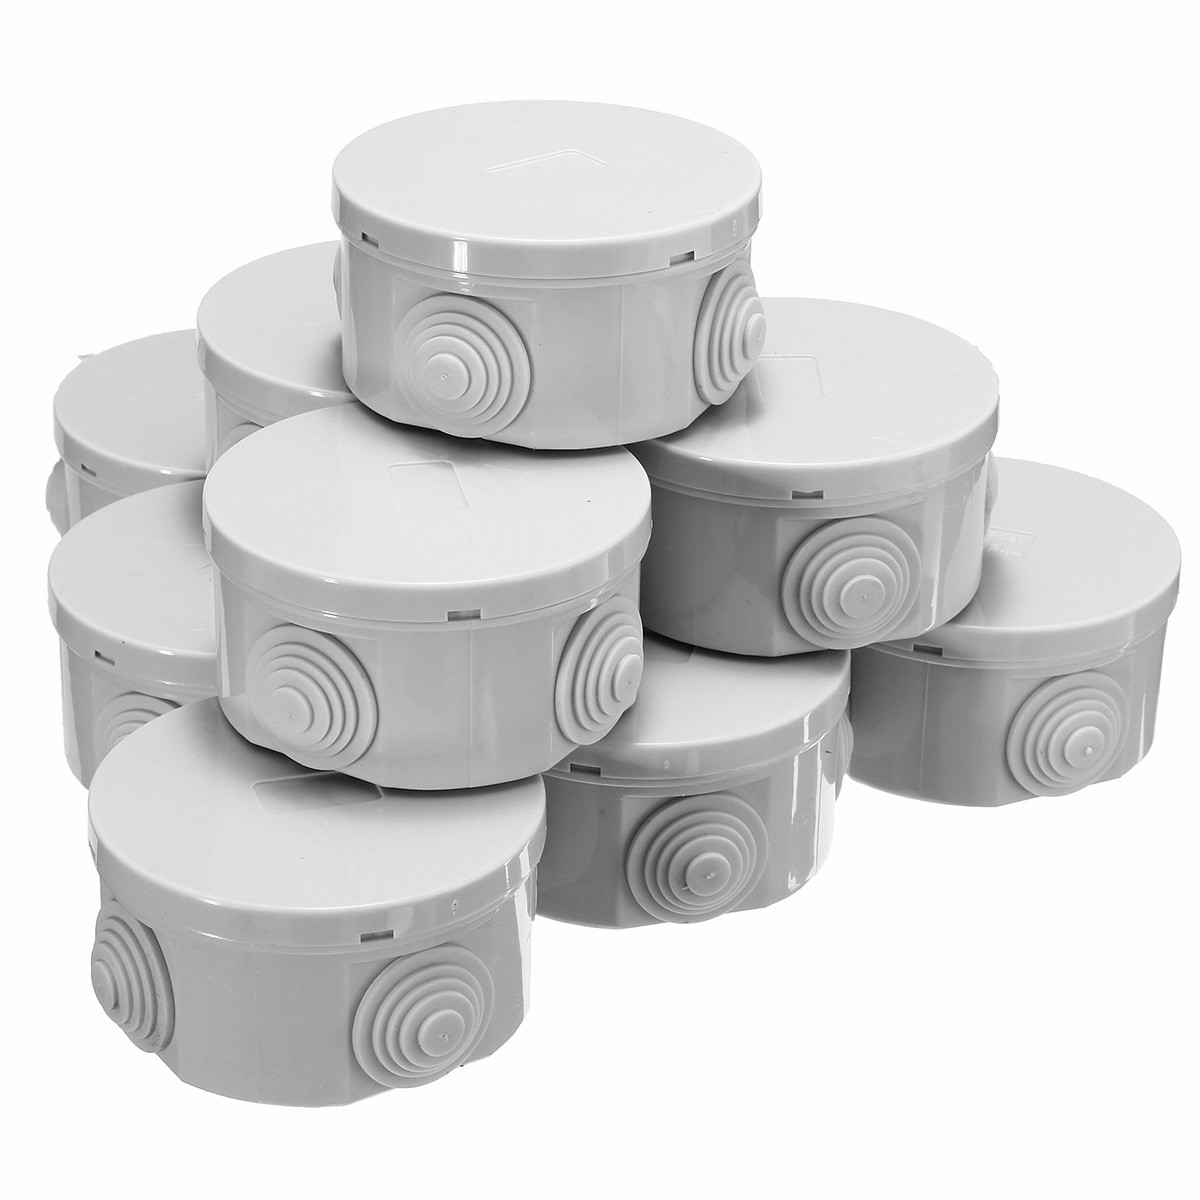 

10Pcs set 80x40mm ABS IP44 Waterproof Round Shape Electric Junction Box Electric Project Enclosure Case with 4 Grommets Cable for Outdoor DIY Electric